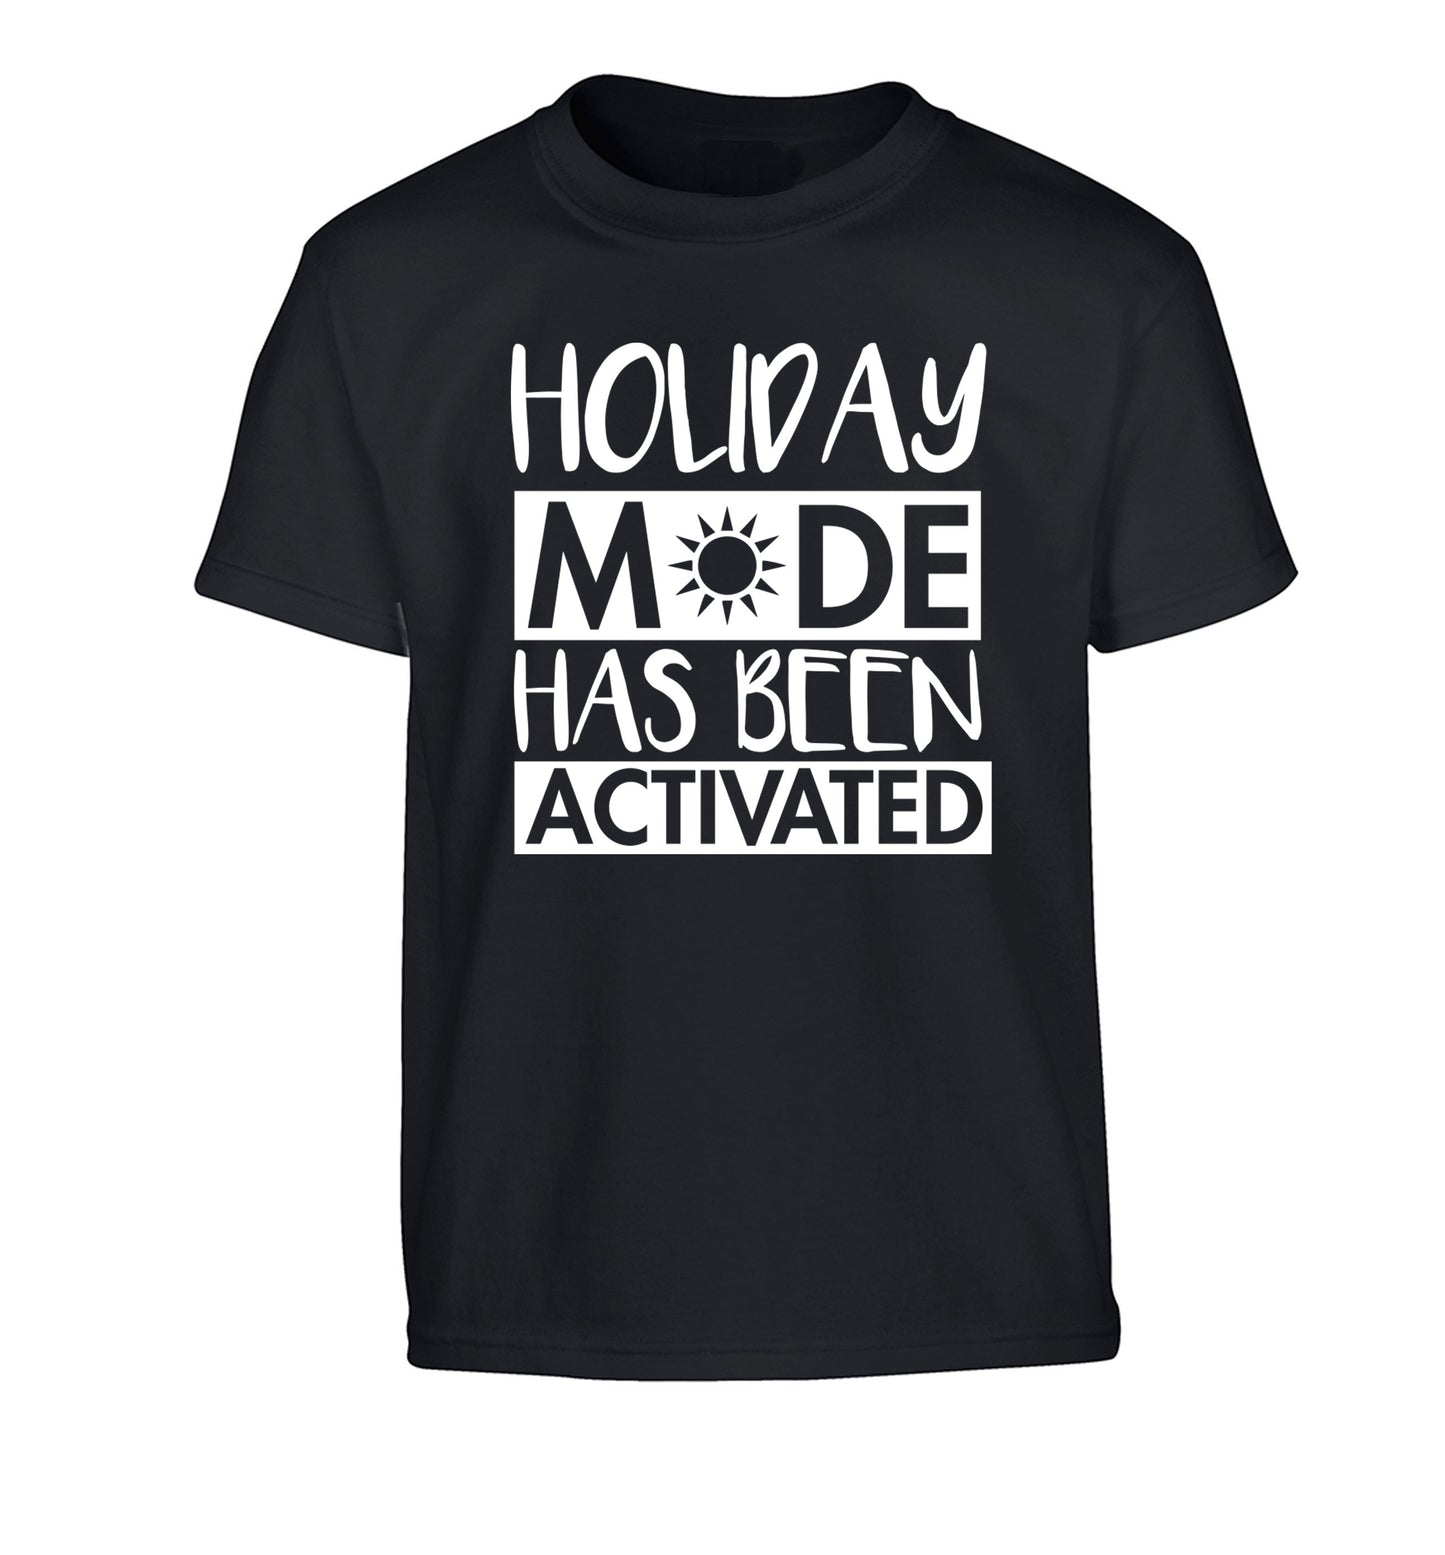 Holiday mode has been activated Children's black Tshirt 12-14 Years